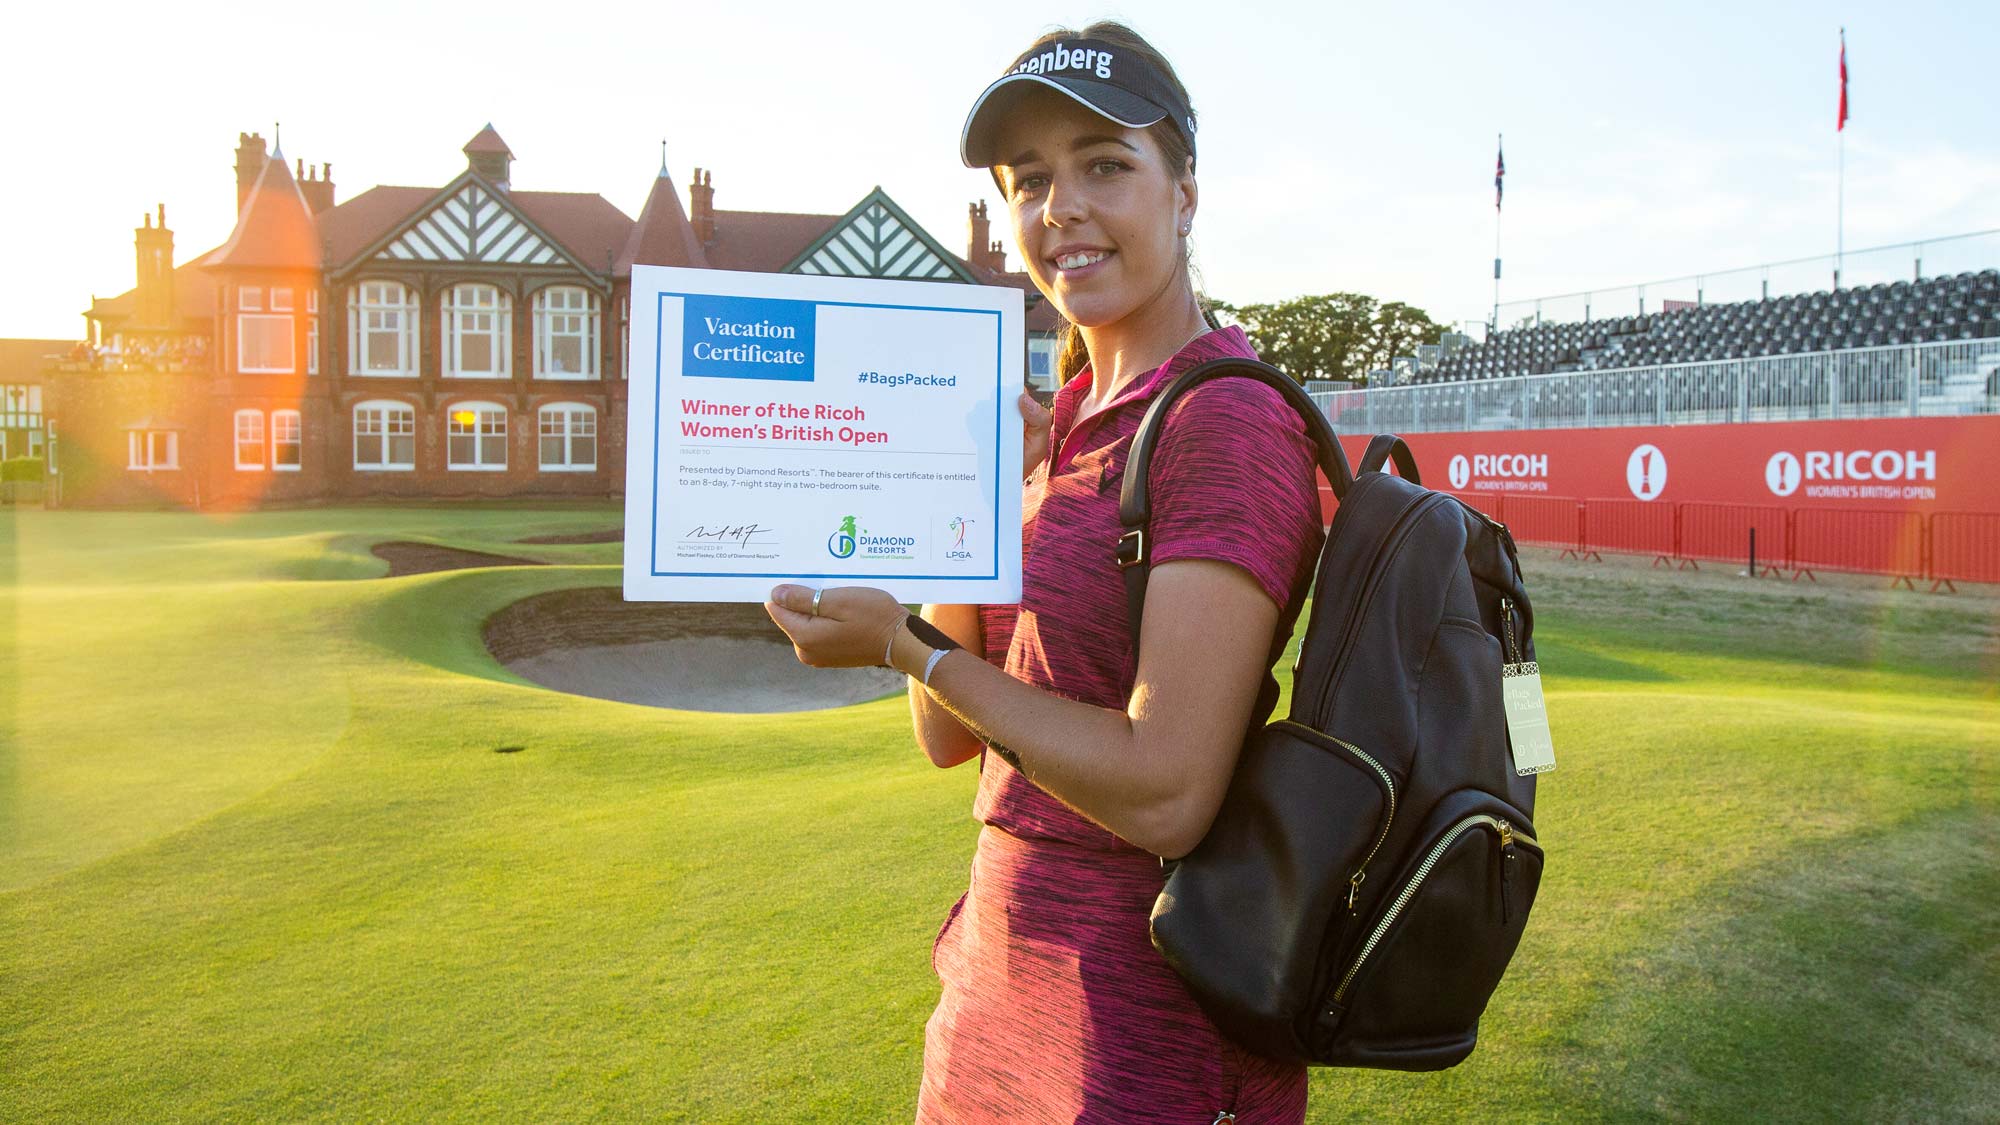 Georgia Hall has her #BagsPacked for the 2019 Diamond Resorts Tournament of Champions after her first career LPGA victory at the 2018 Ricoh Women's British Open